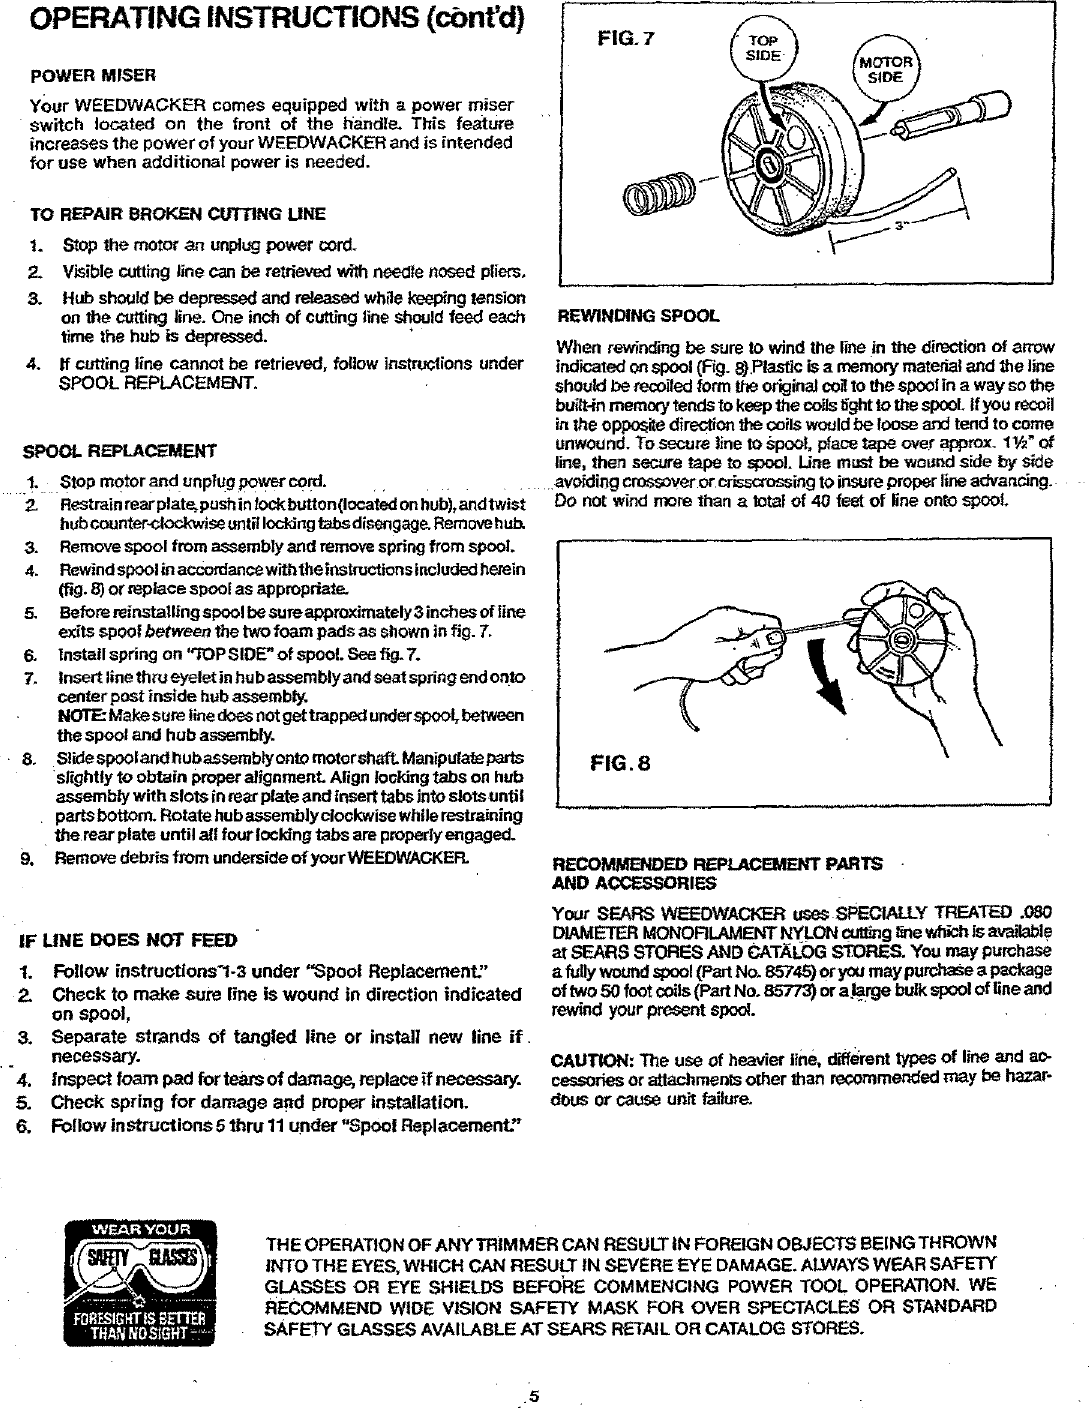 Page 5 of 8 - Craftsman 257796041 User Manual  ADJUSTABLE HANDLE WEED AND GRASS TRIMMER - Manuals Guides L0707268